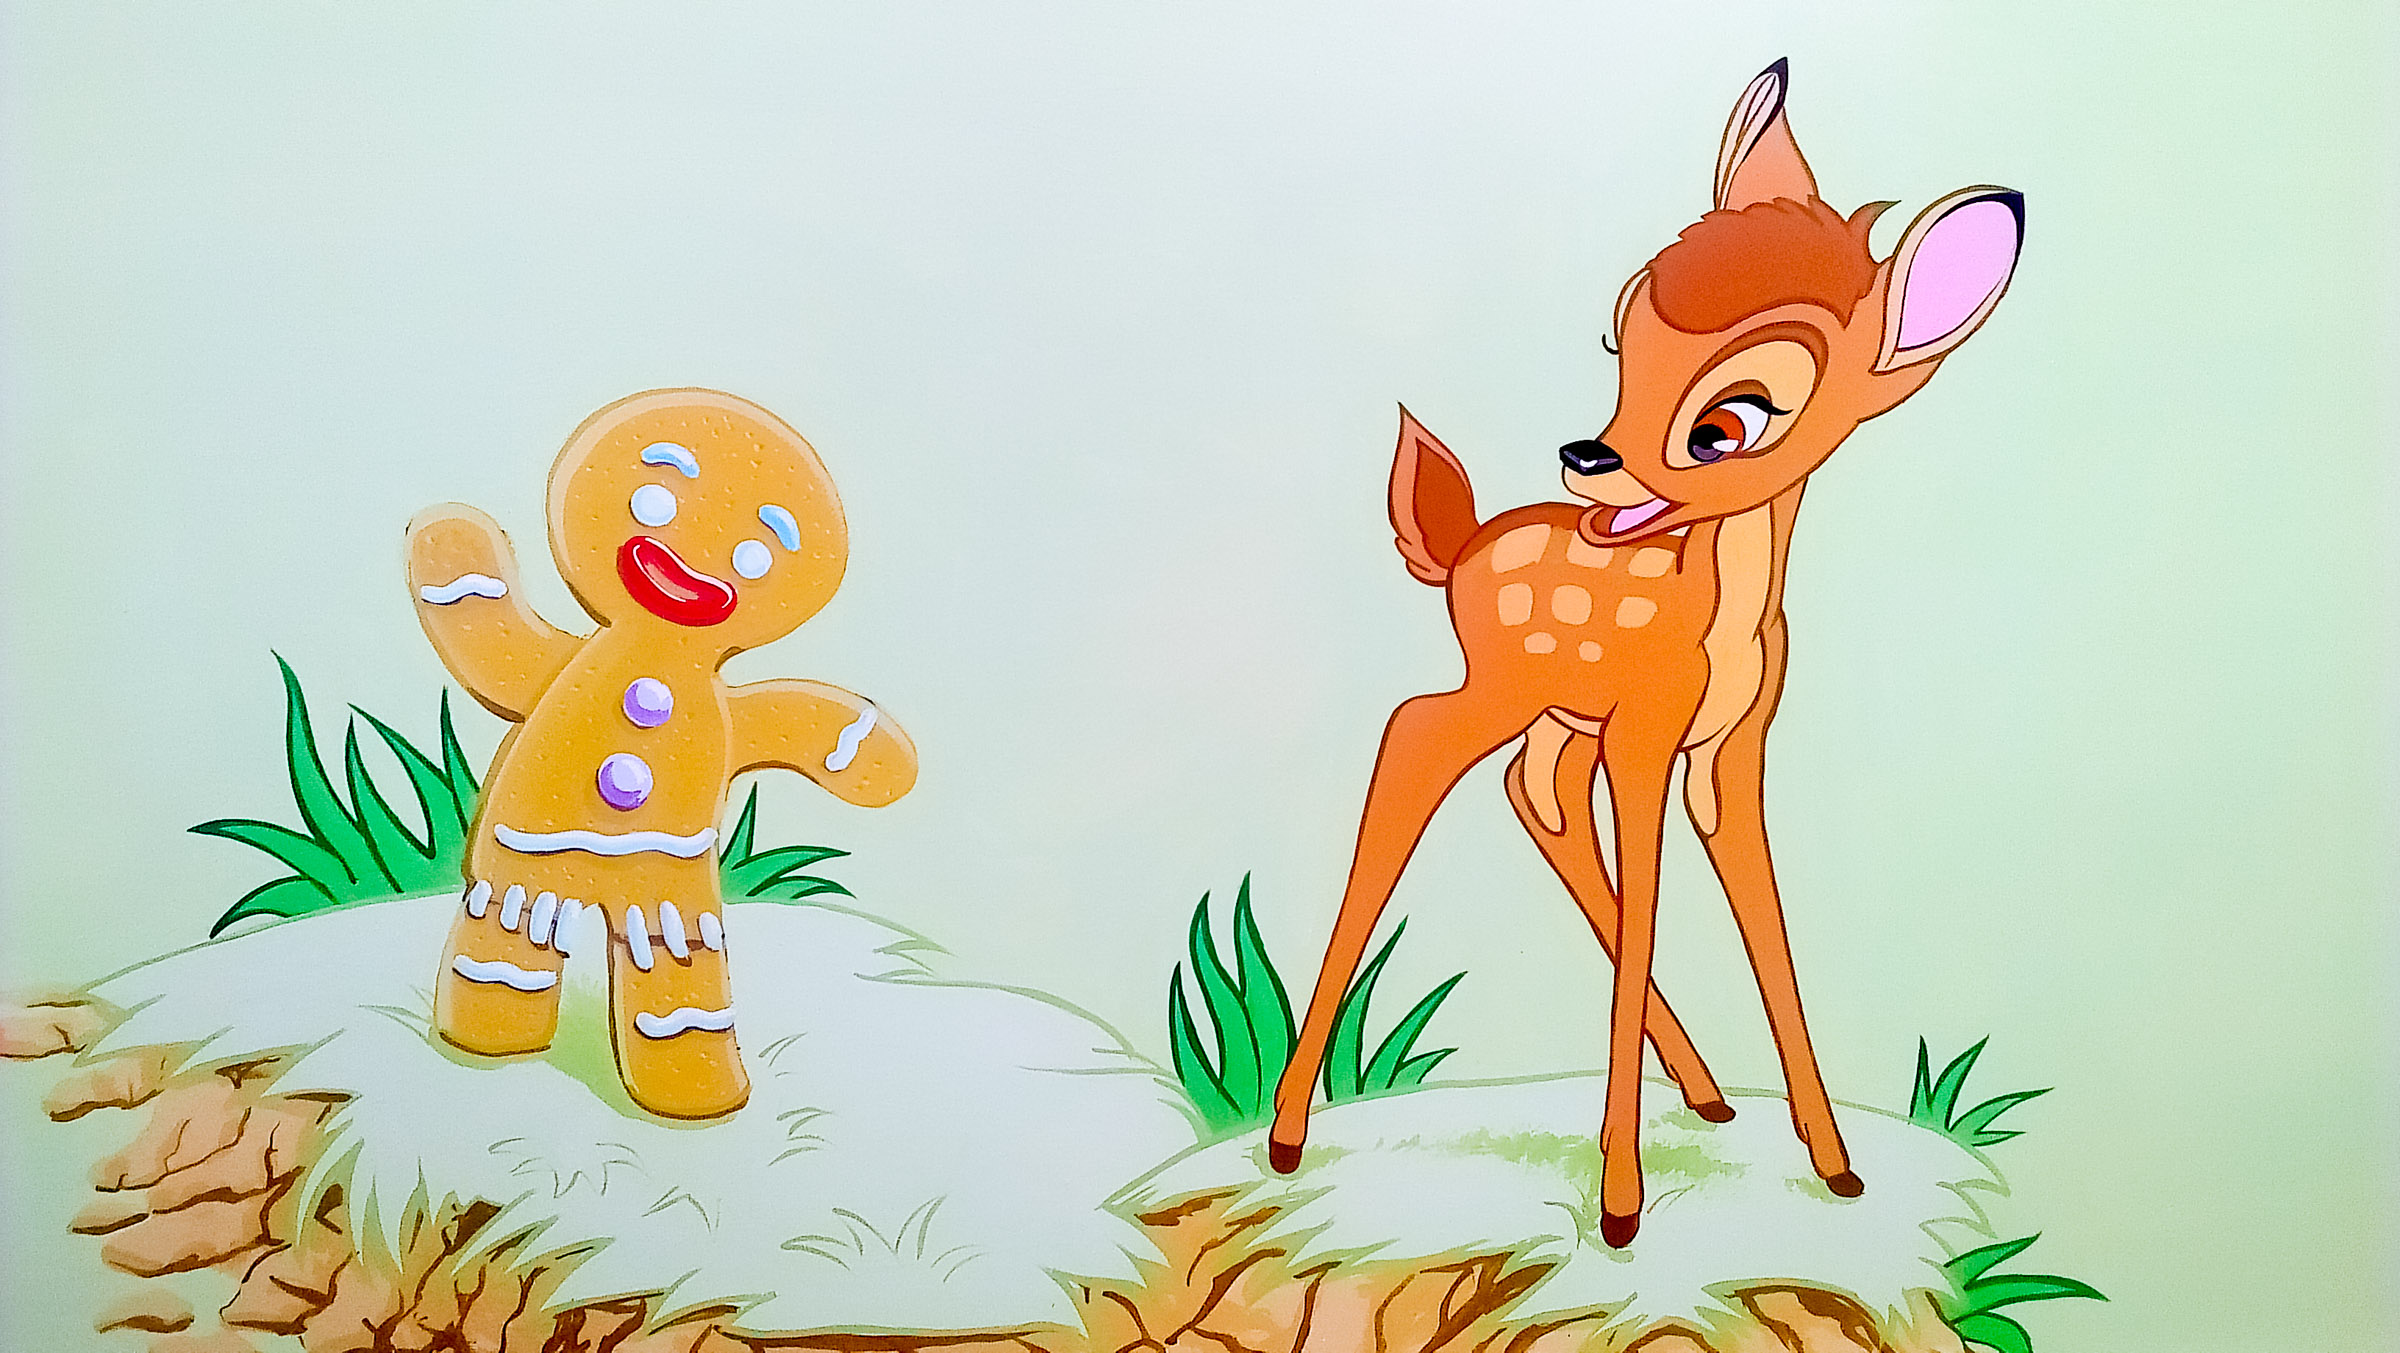 Gingerbread man from Shrek and Bambi in this part of the nursery mural